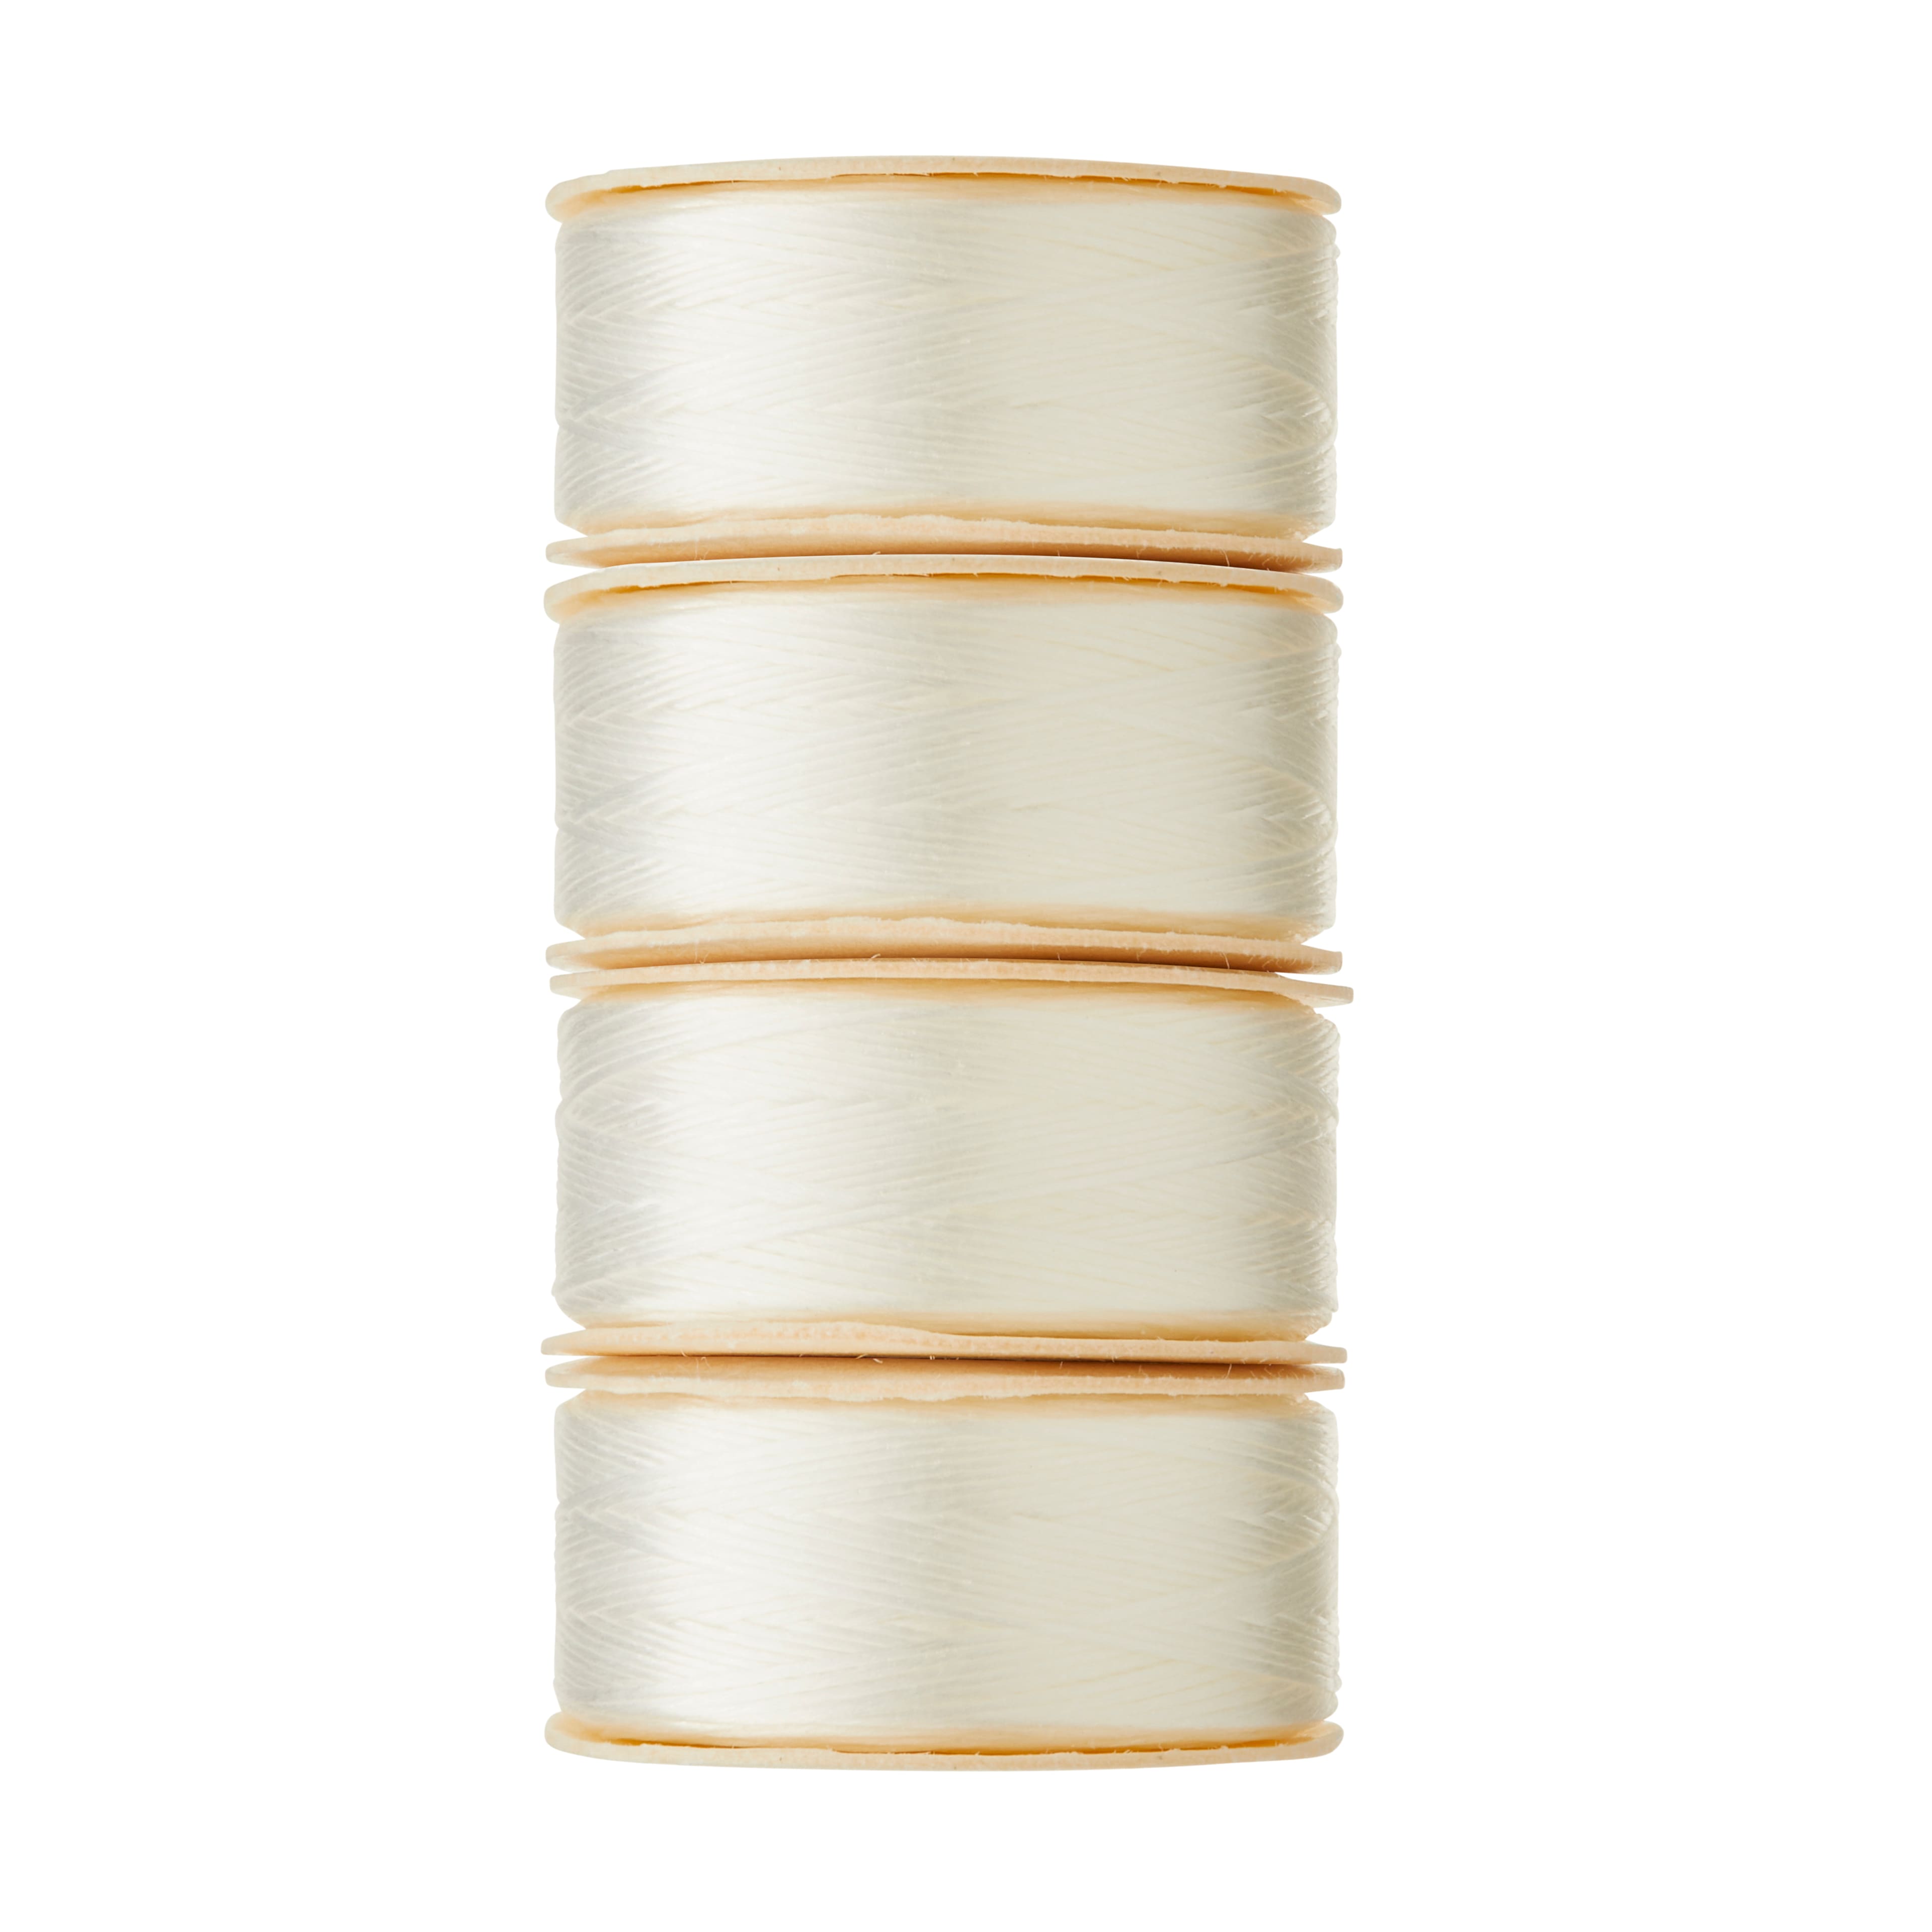 Find the Beadalon® Nymo® Nylon Threads, Assorted White at Michaels